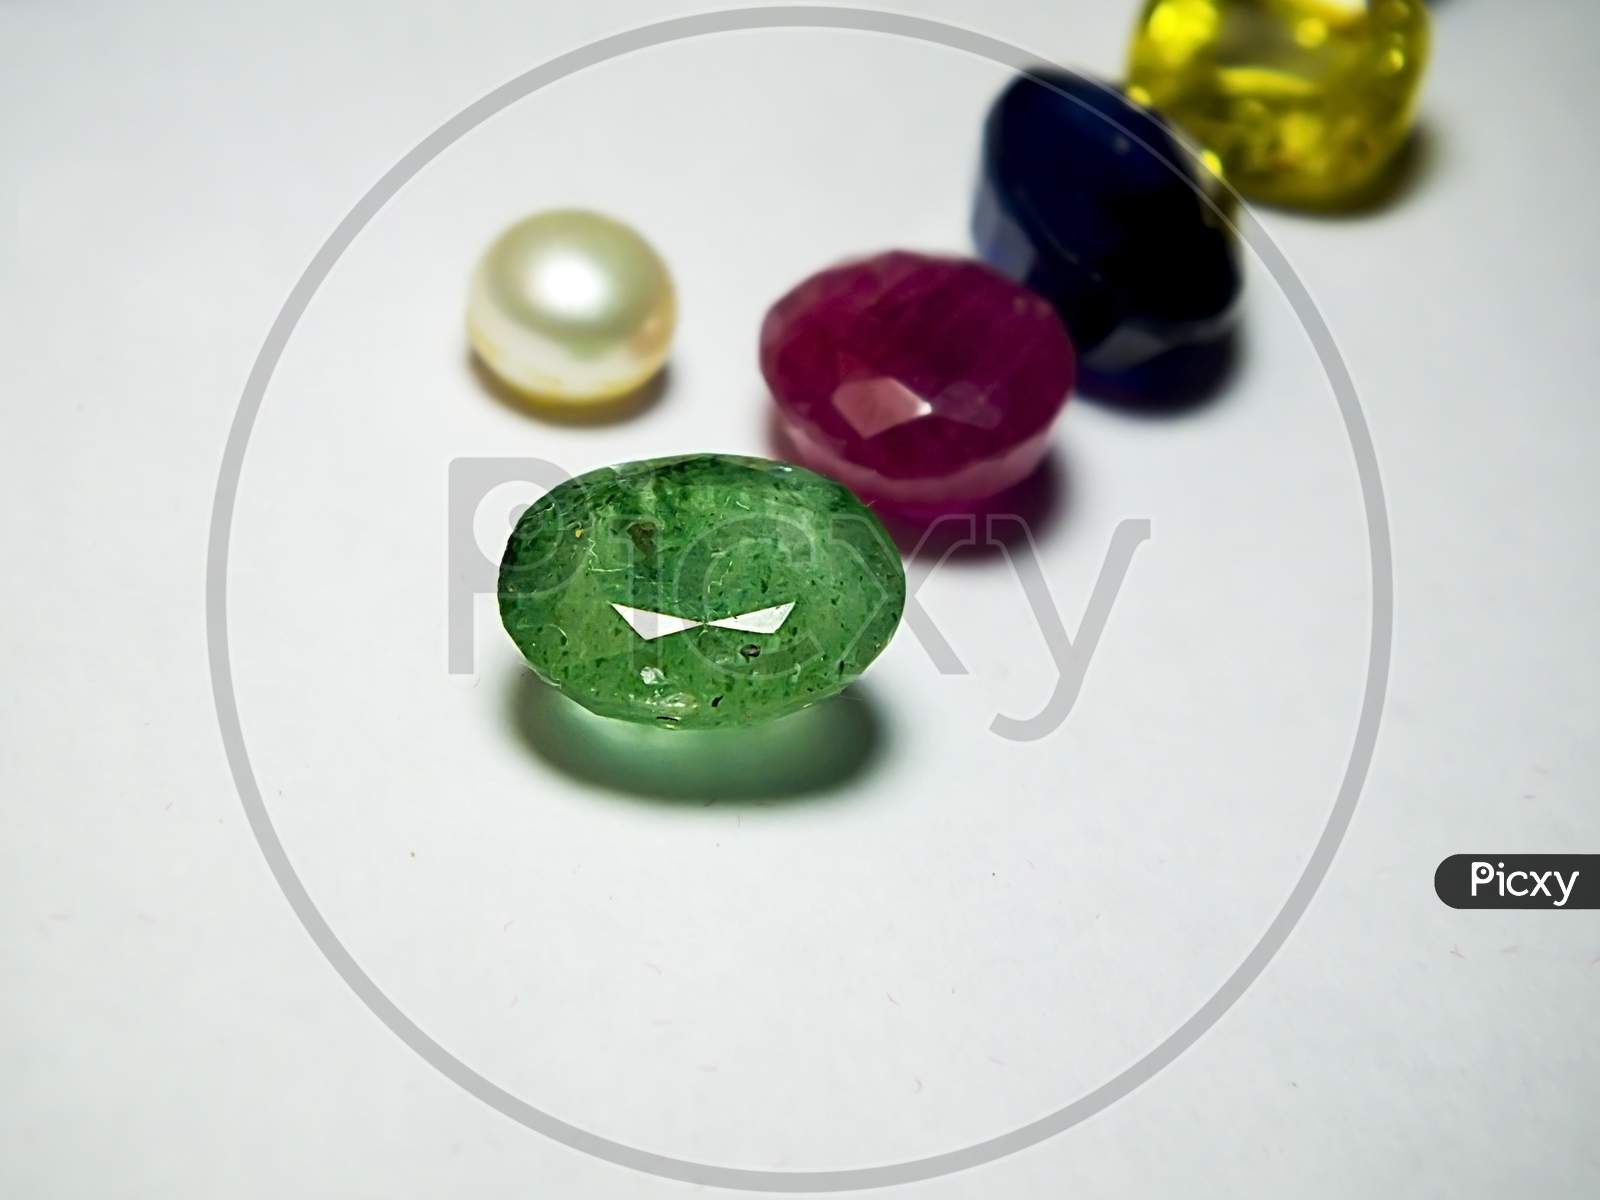 A close up photo of a Green emerald on a gems store shop.